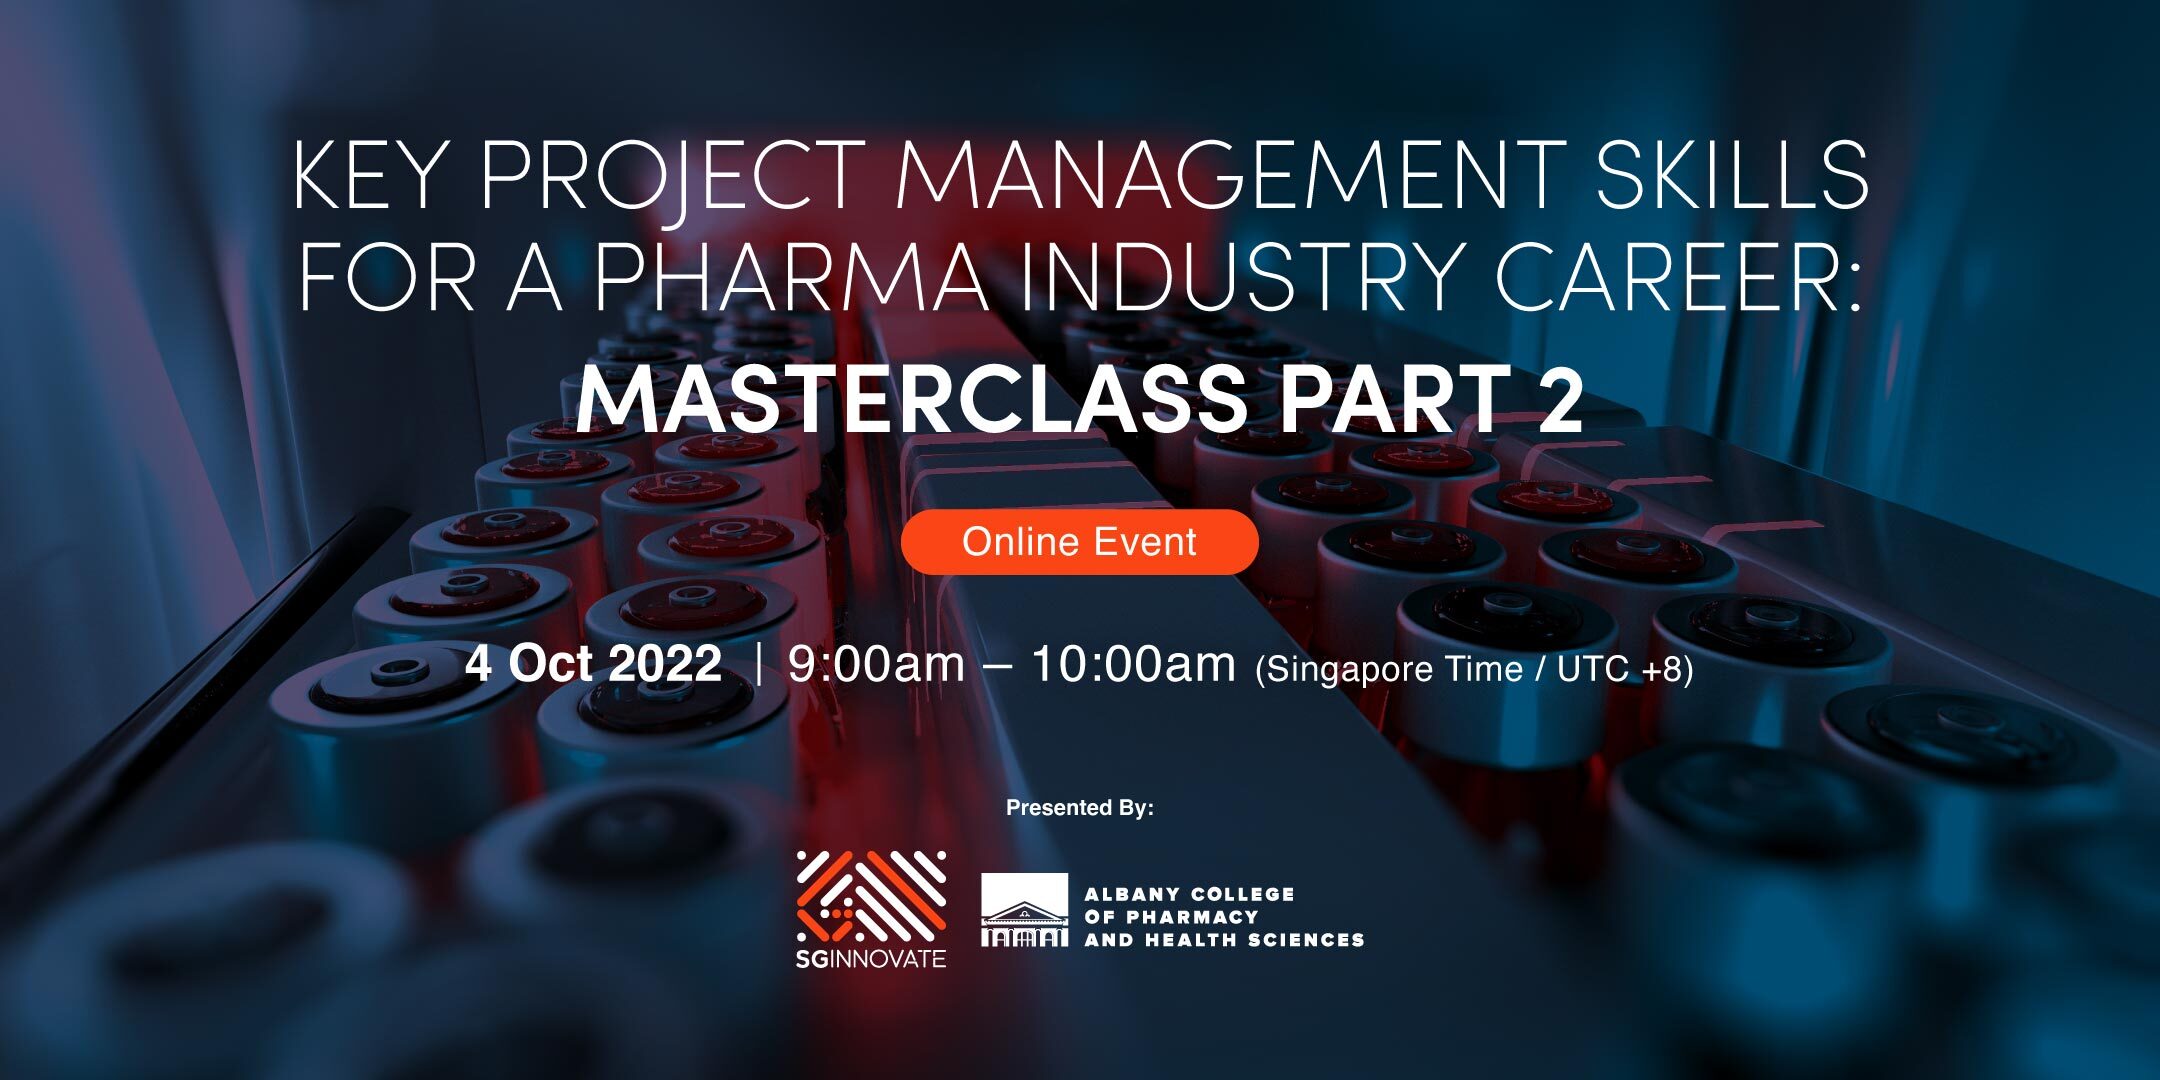 Key Project Management Skills for a Pharma Industry Career: Masterclass Part 2